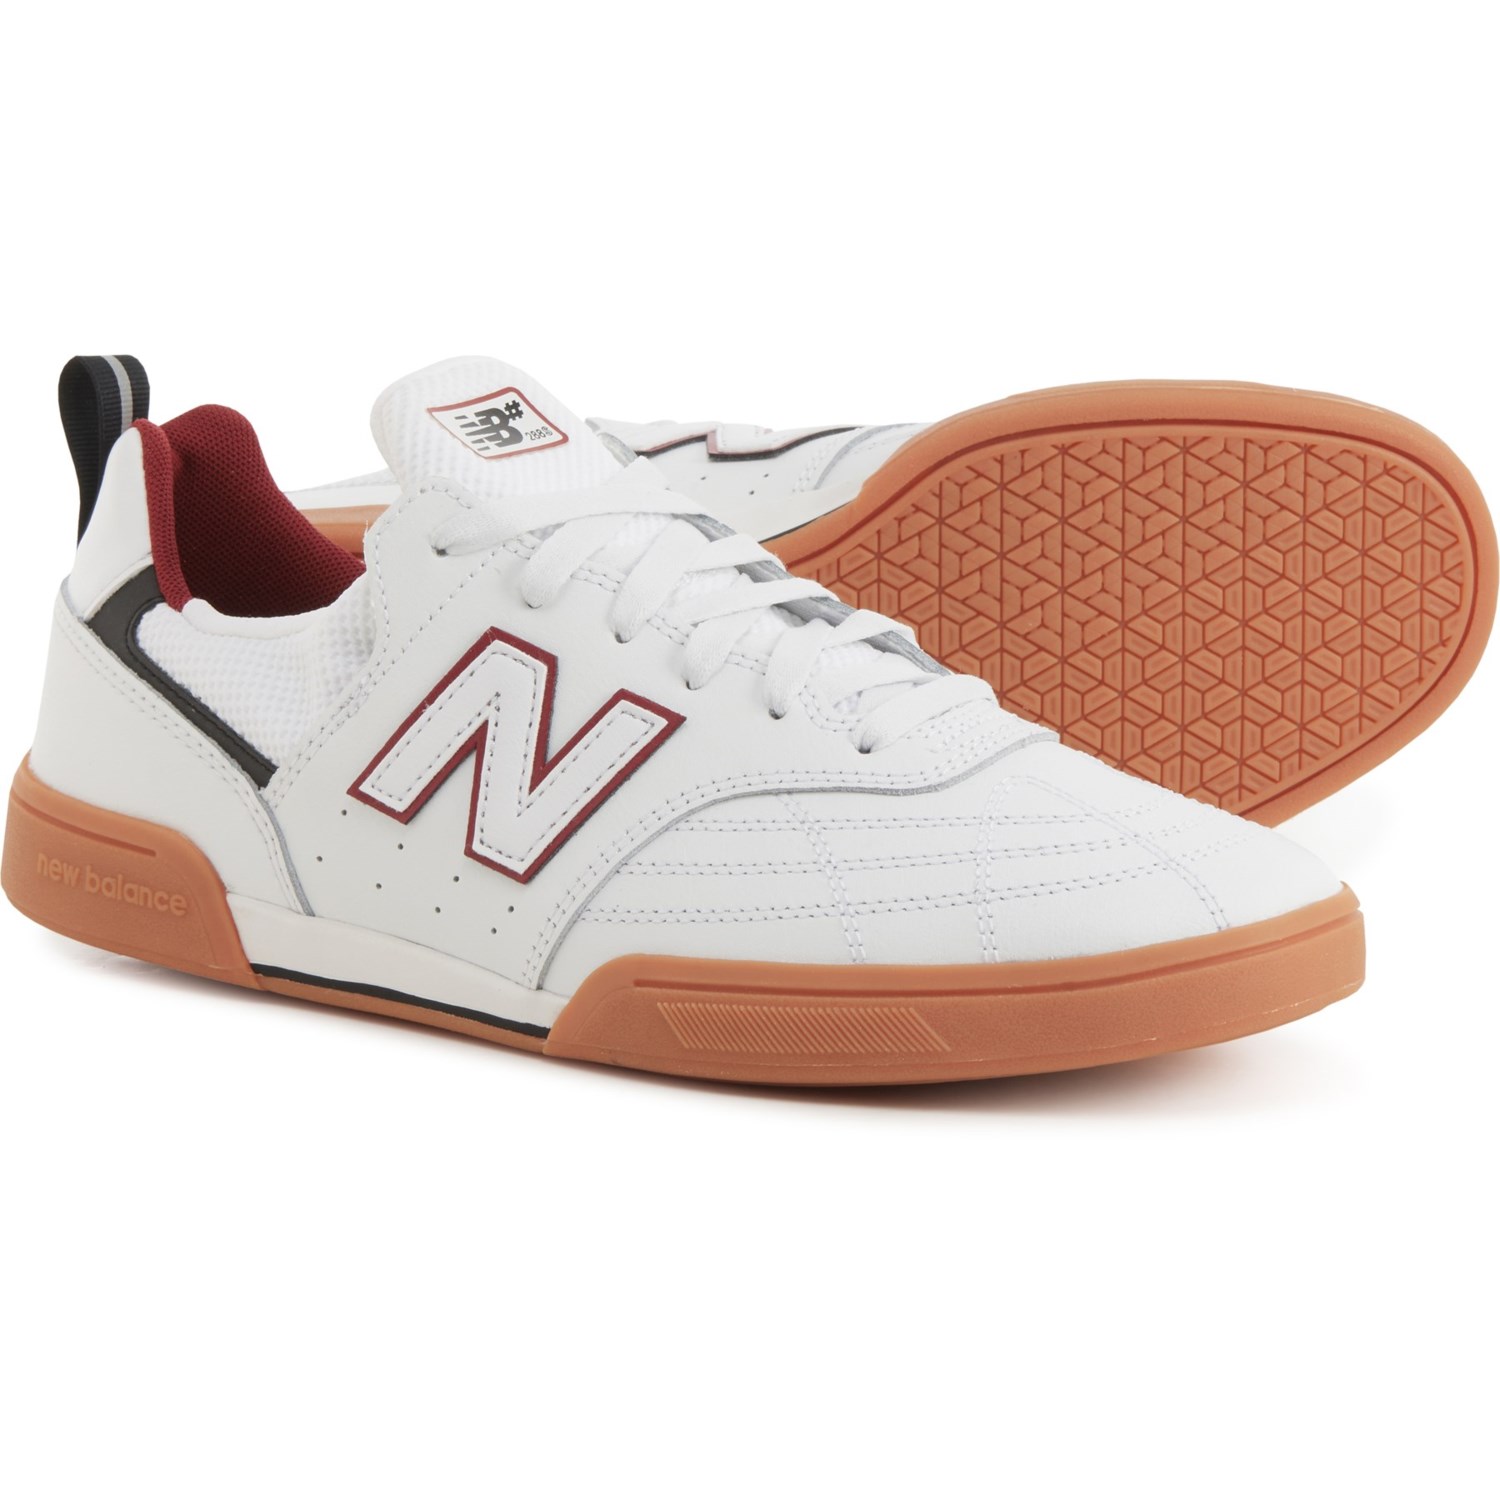 New Balance Numeric 288 Skateboarding Sneakers - Leather (For Men)